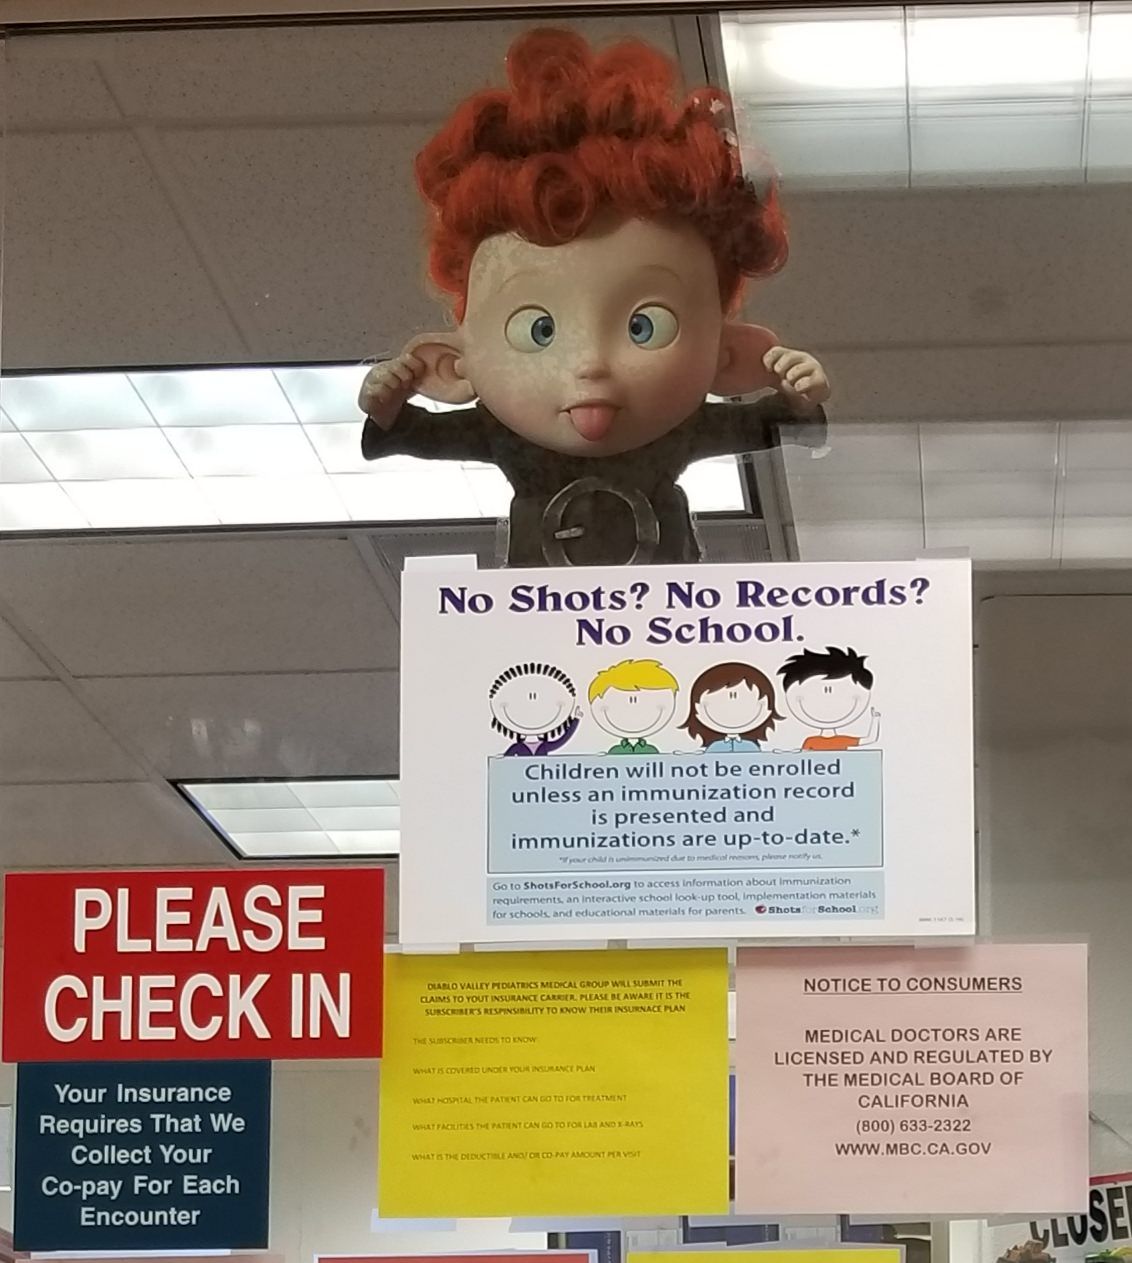 The front office staff found a way to make their feelings about anti-vaxxers known